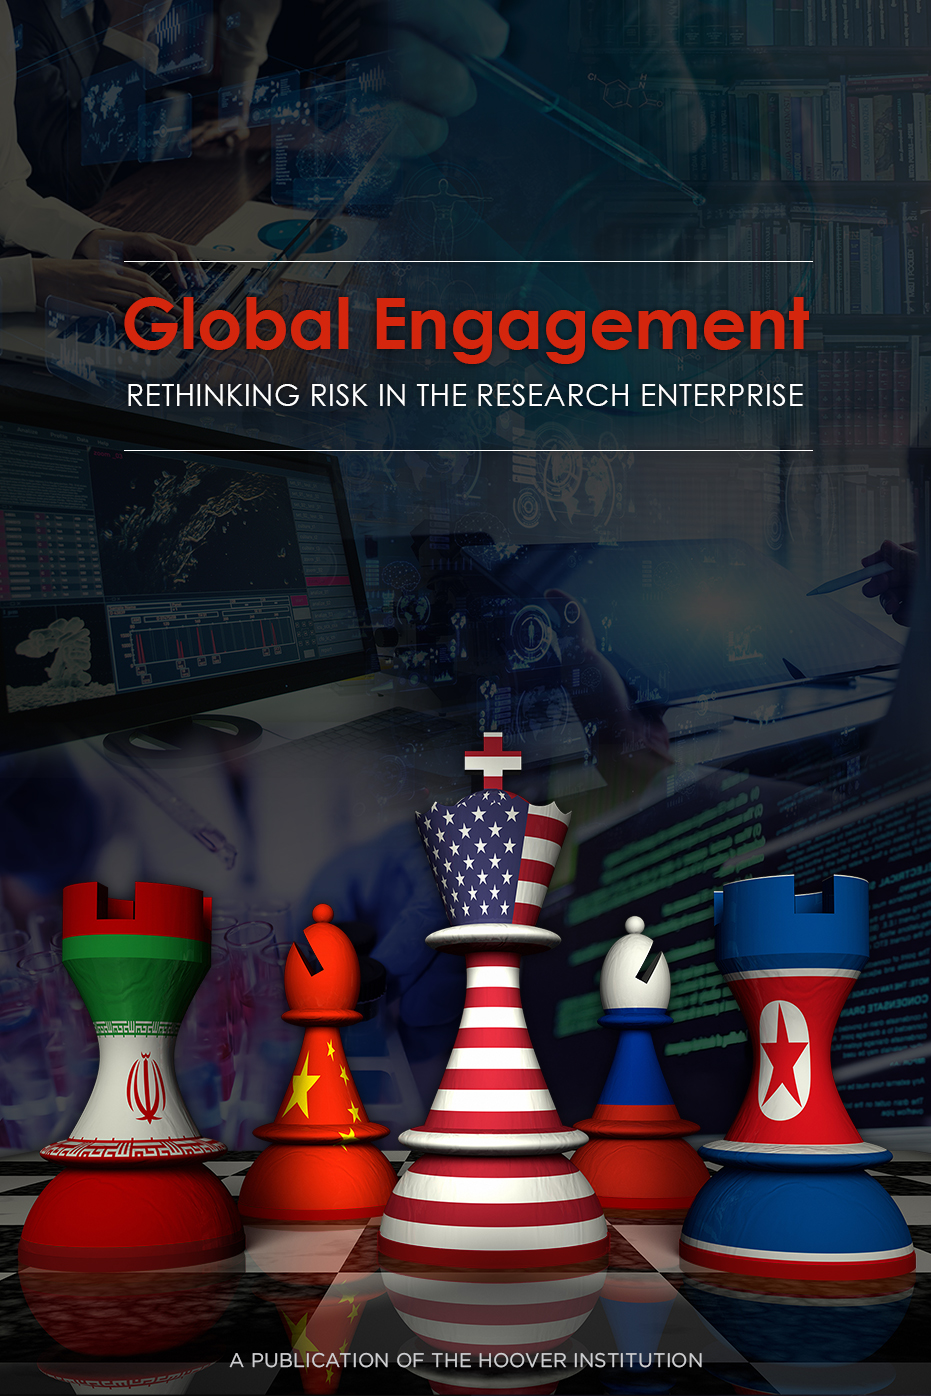 Global Engagement: Rethinking Risk In The Research Enterprise